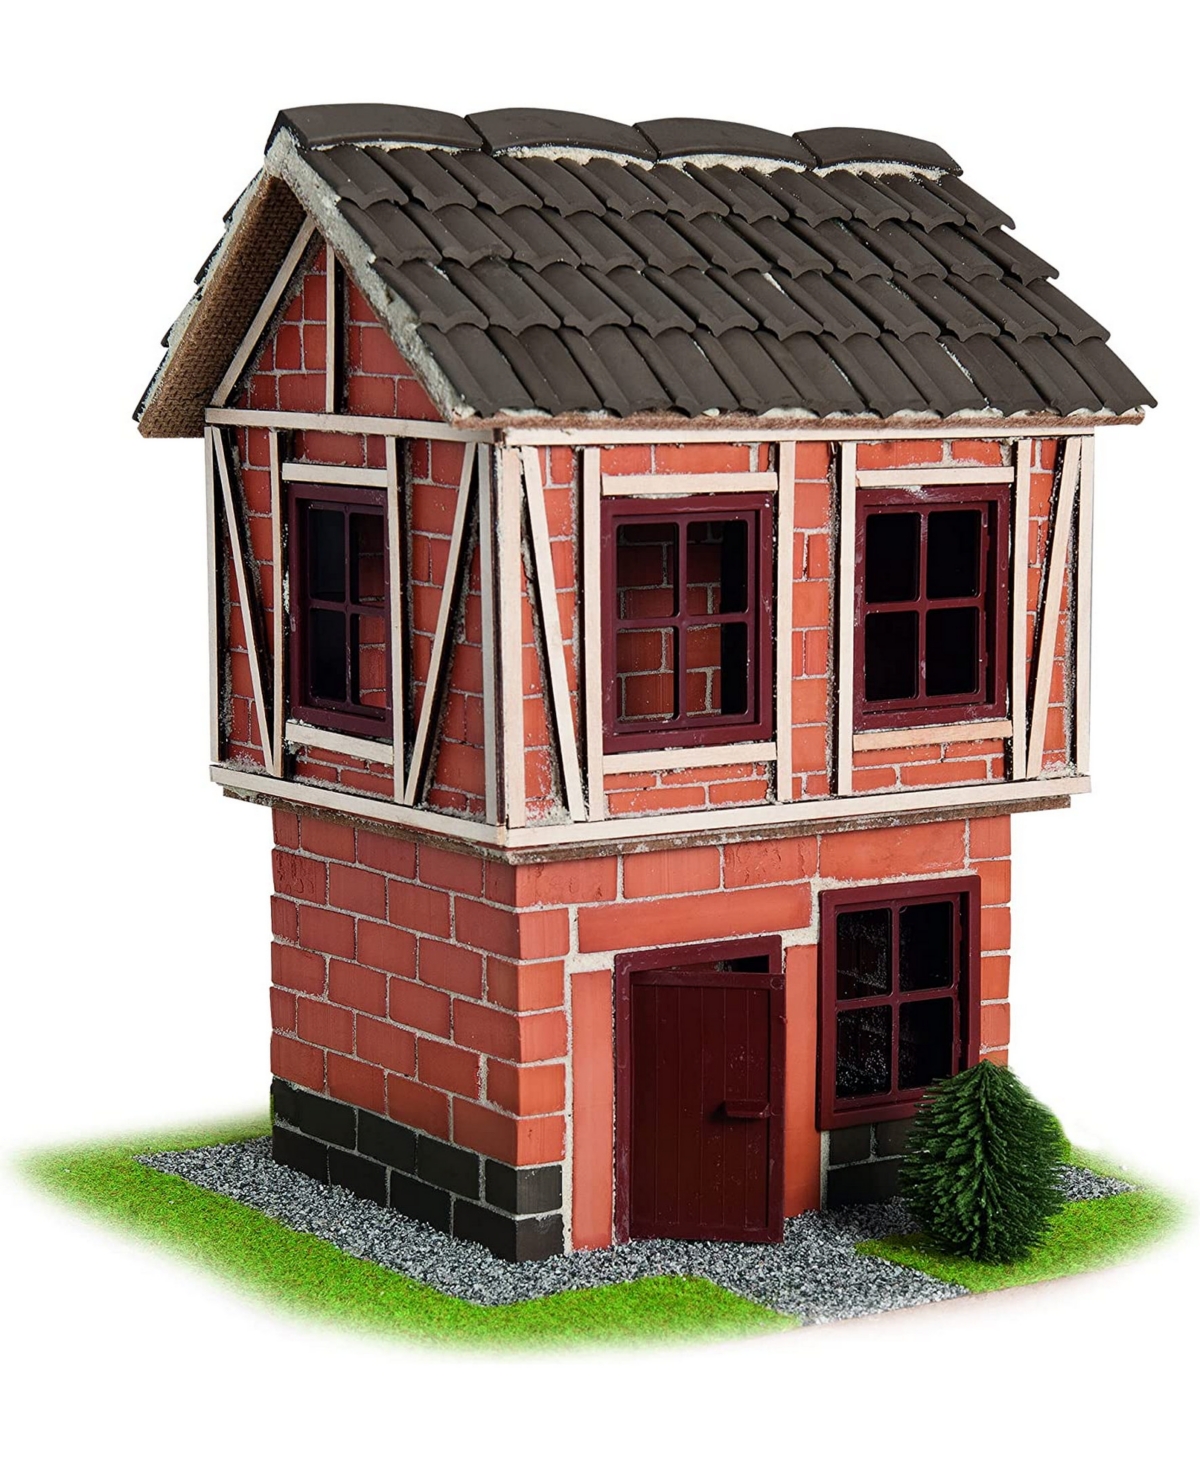 Teifoc Half-timbered House Building Kit In Multicolor